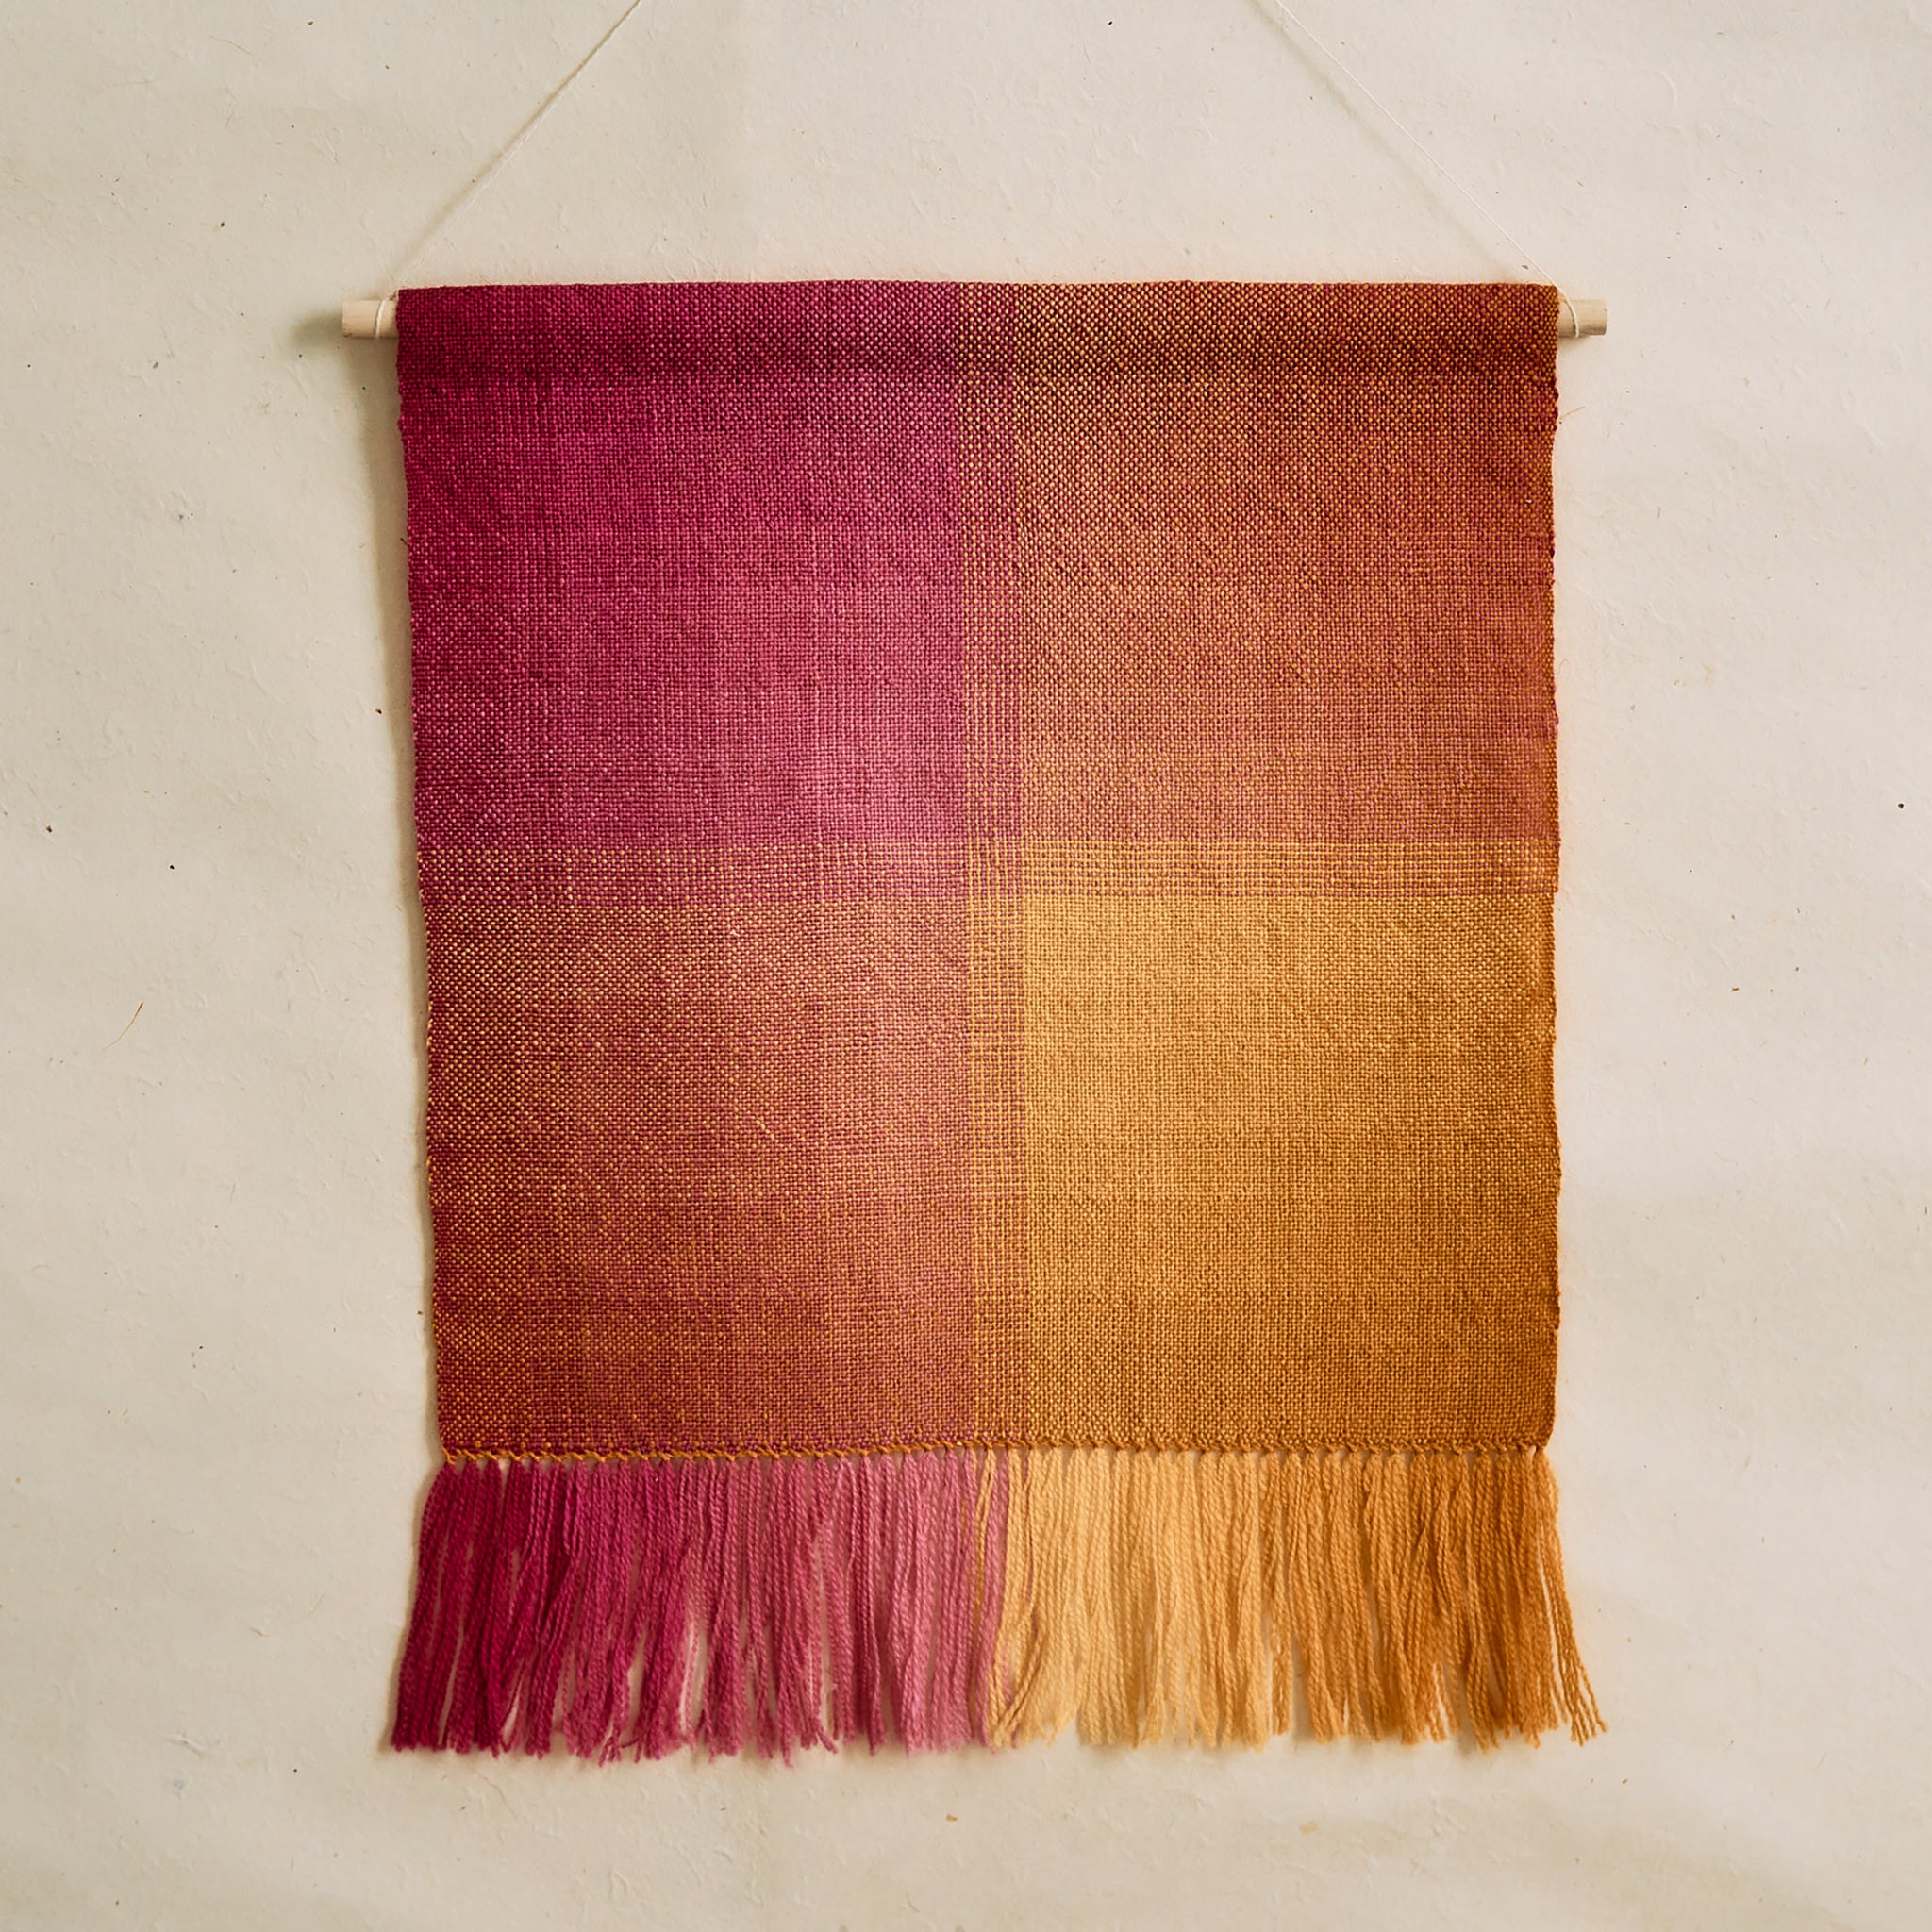 Fundamentals of color in weaving: Color Mixing and the Two-Primary